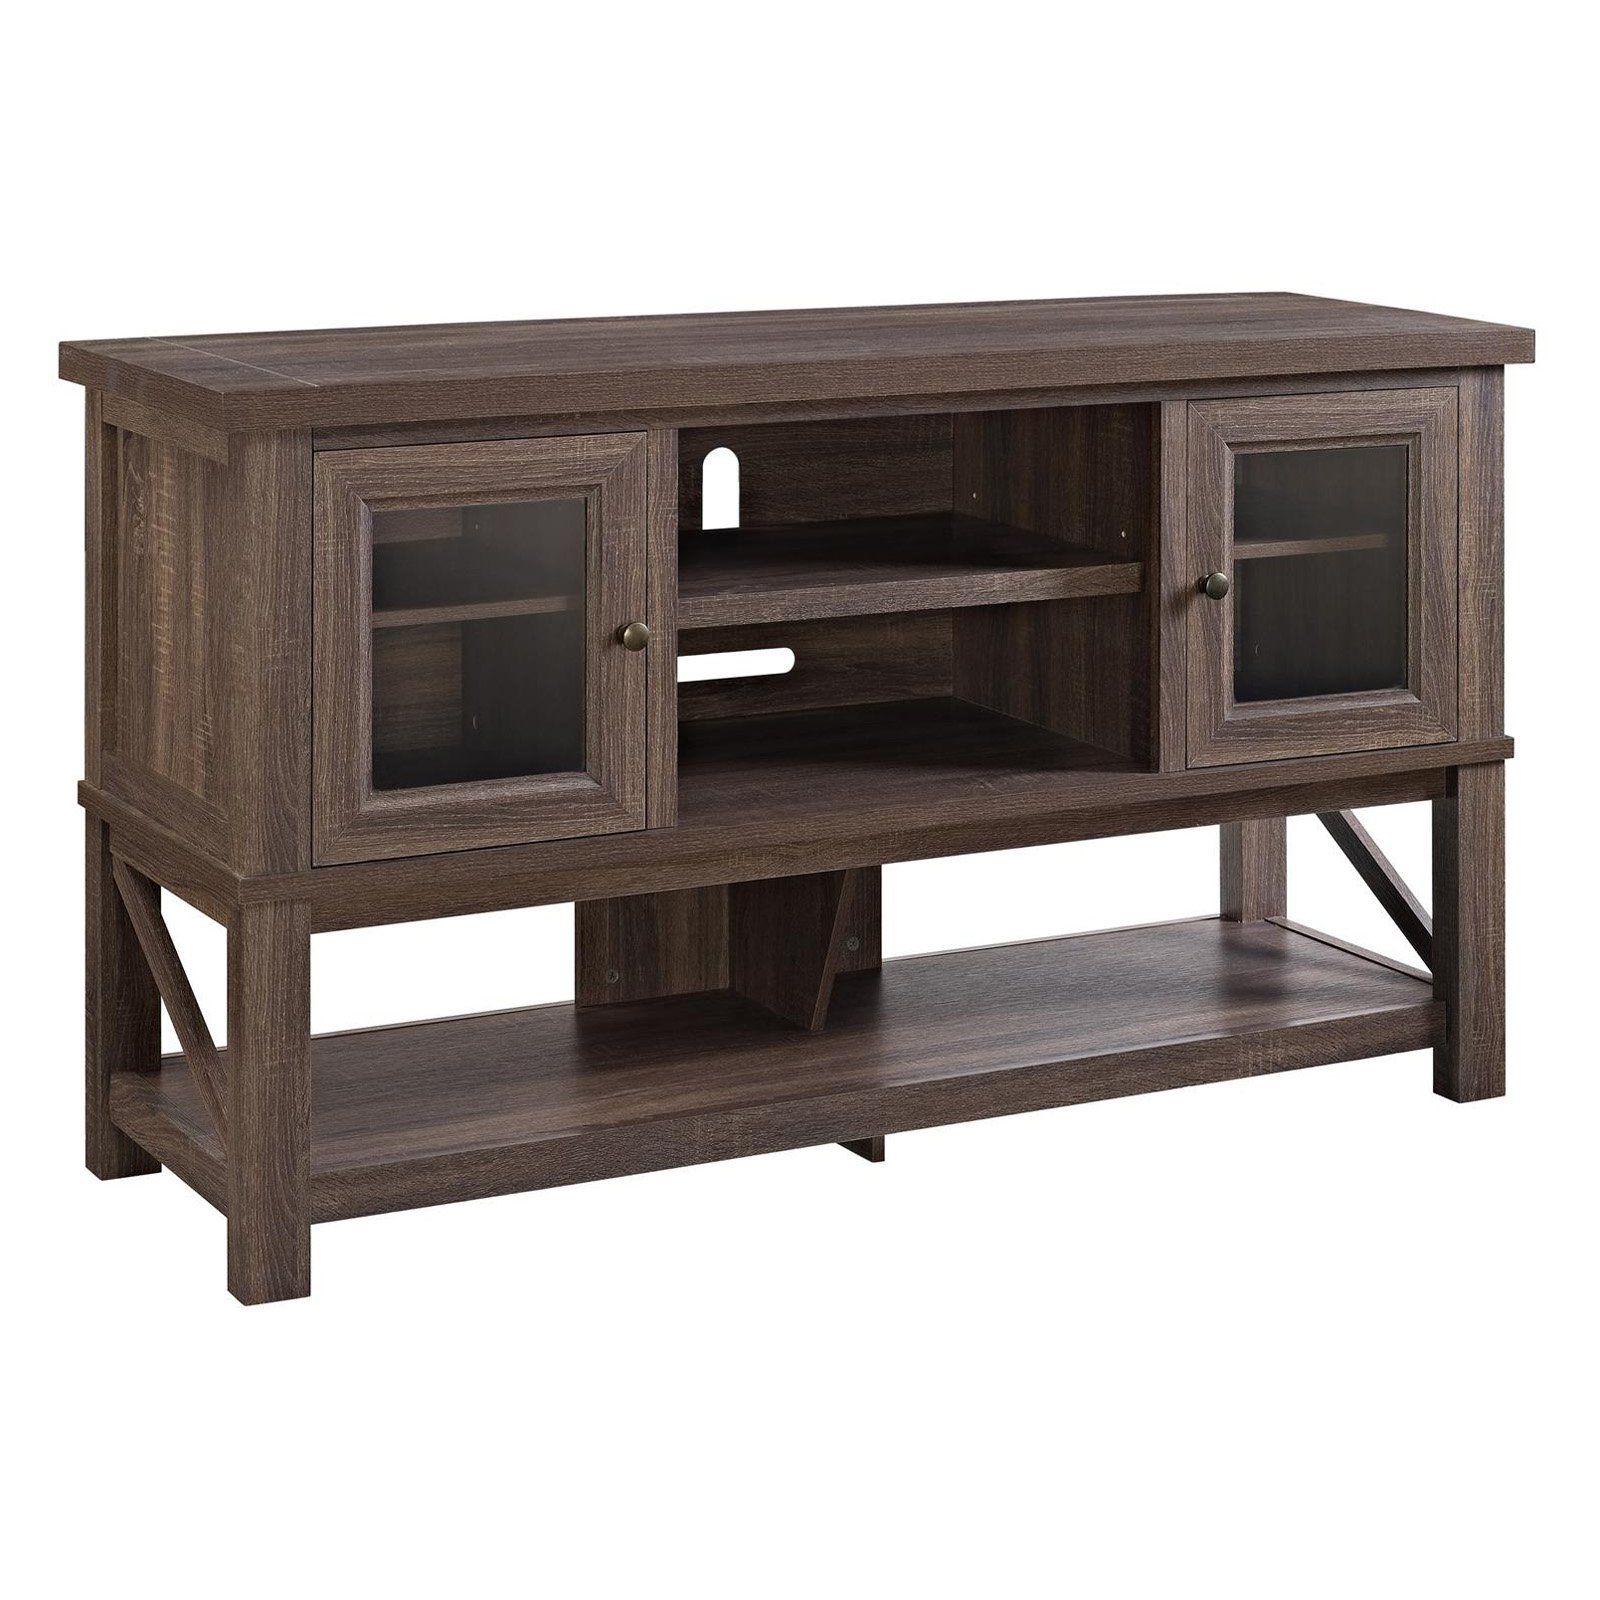 Ameriwood Home Everett Tv Stand For Tvs Up To 70" With With Regard To Mainor Tv Stands For Tvs Up To 70&quot; (View 7 of 15)